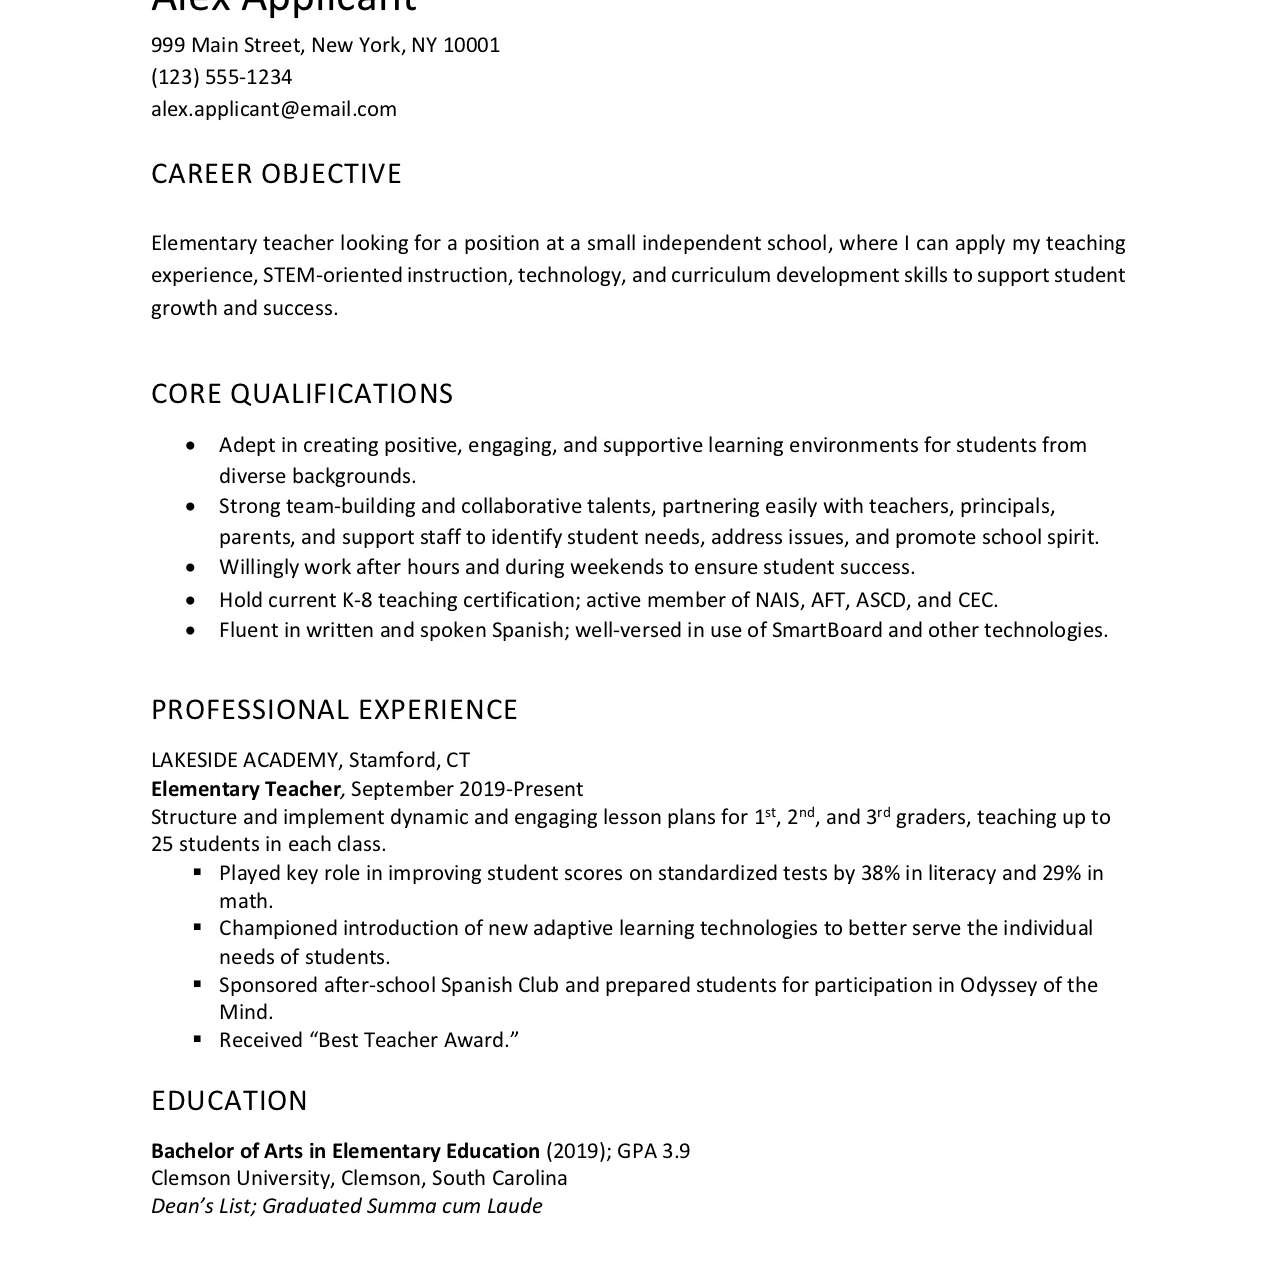 Sample Objective Statements for General Resumes Resume Objective Examples and Writing Tips